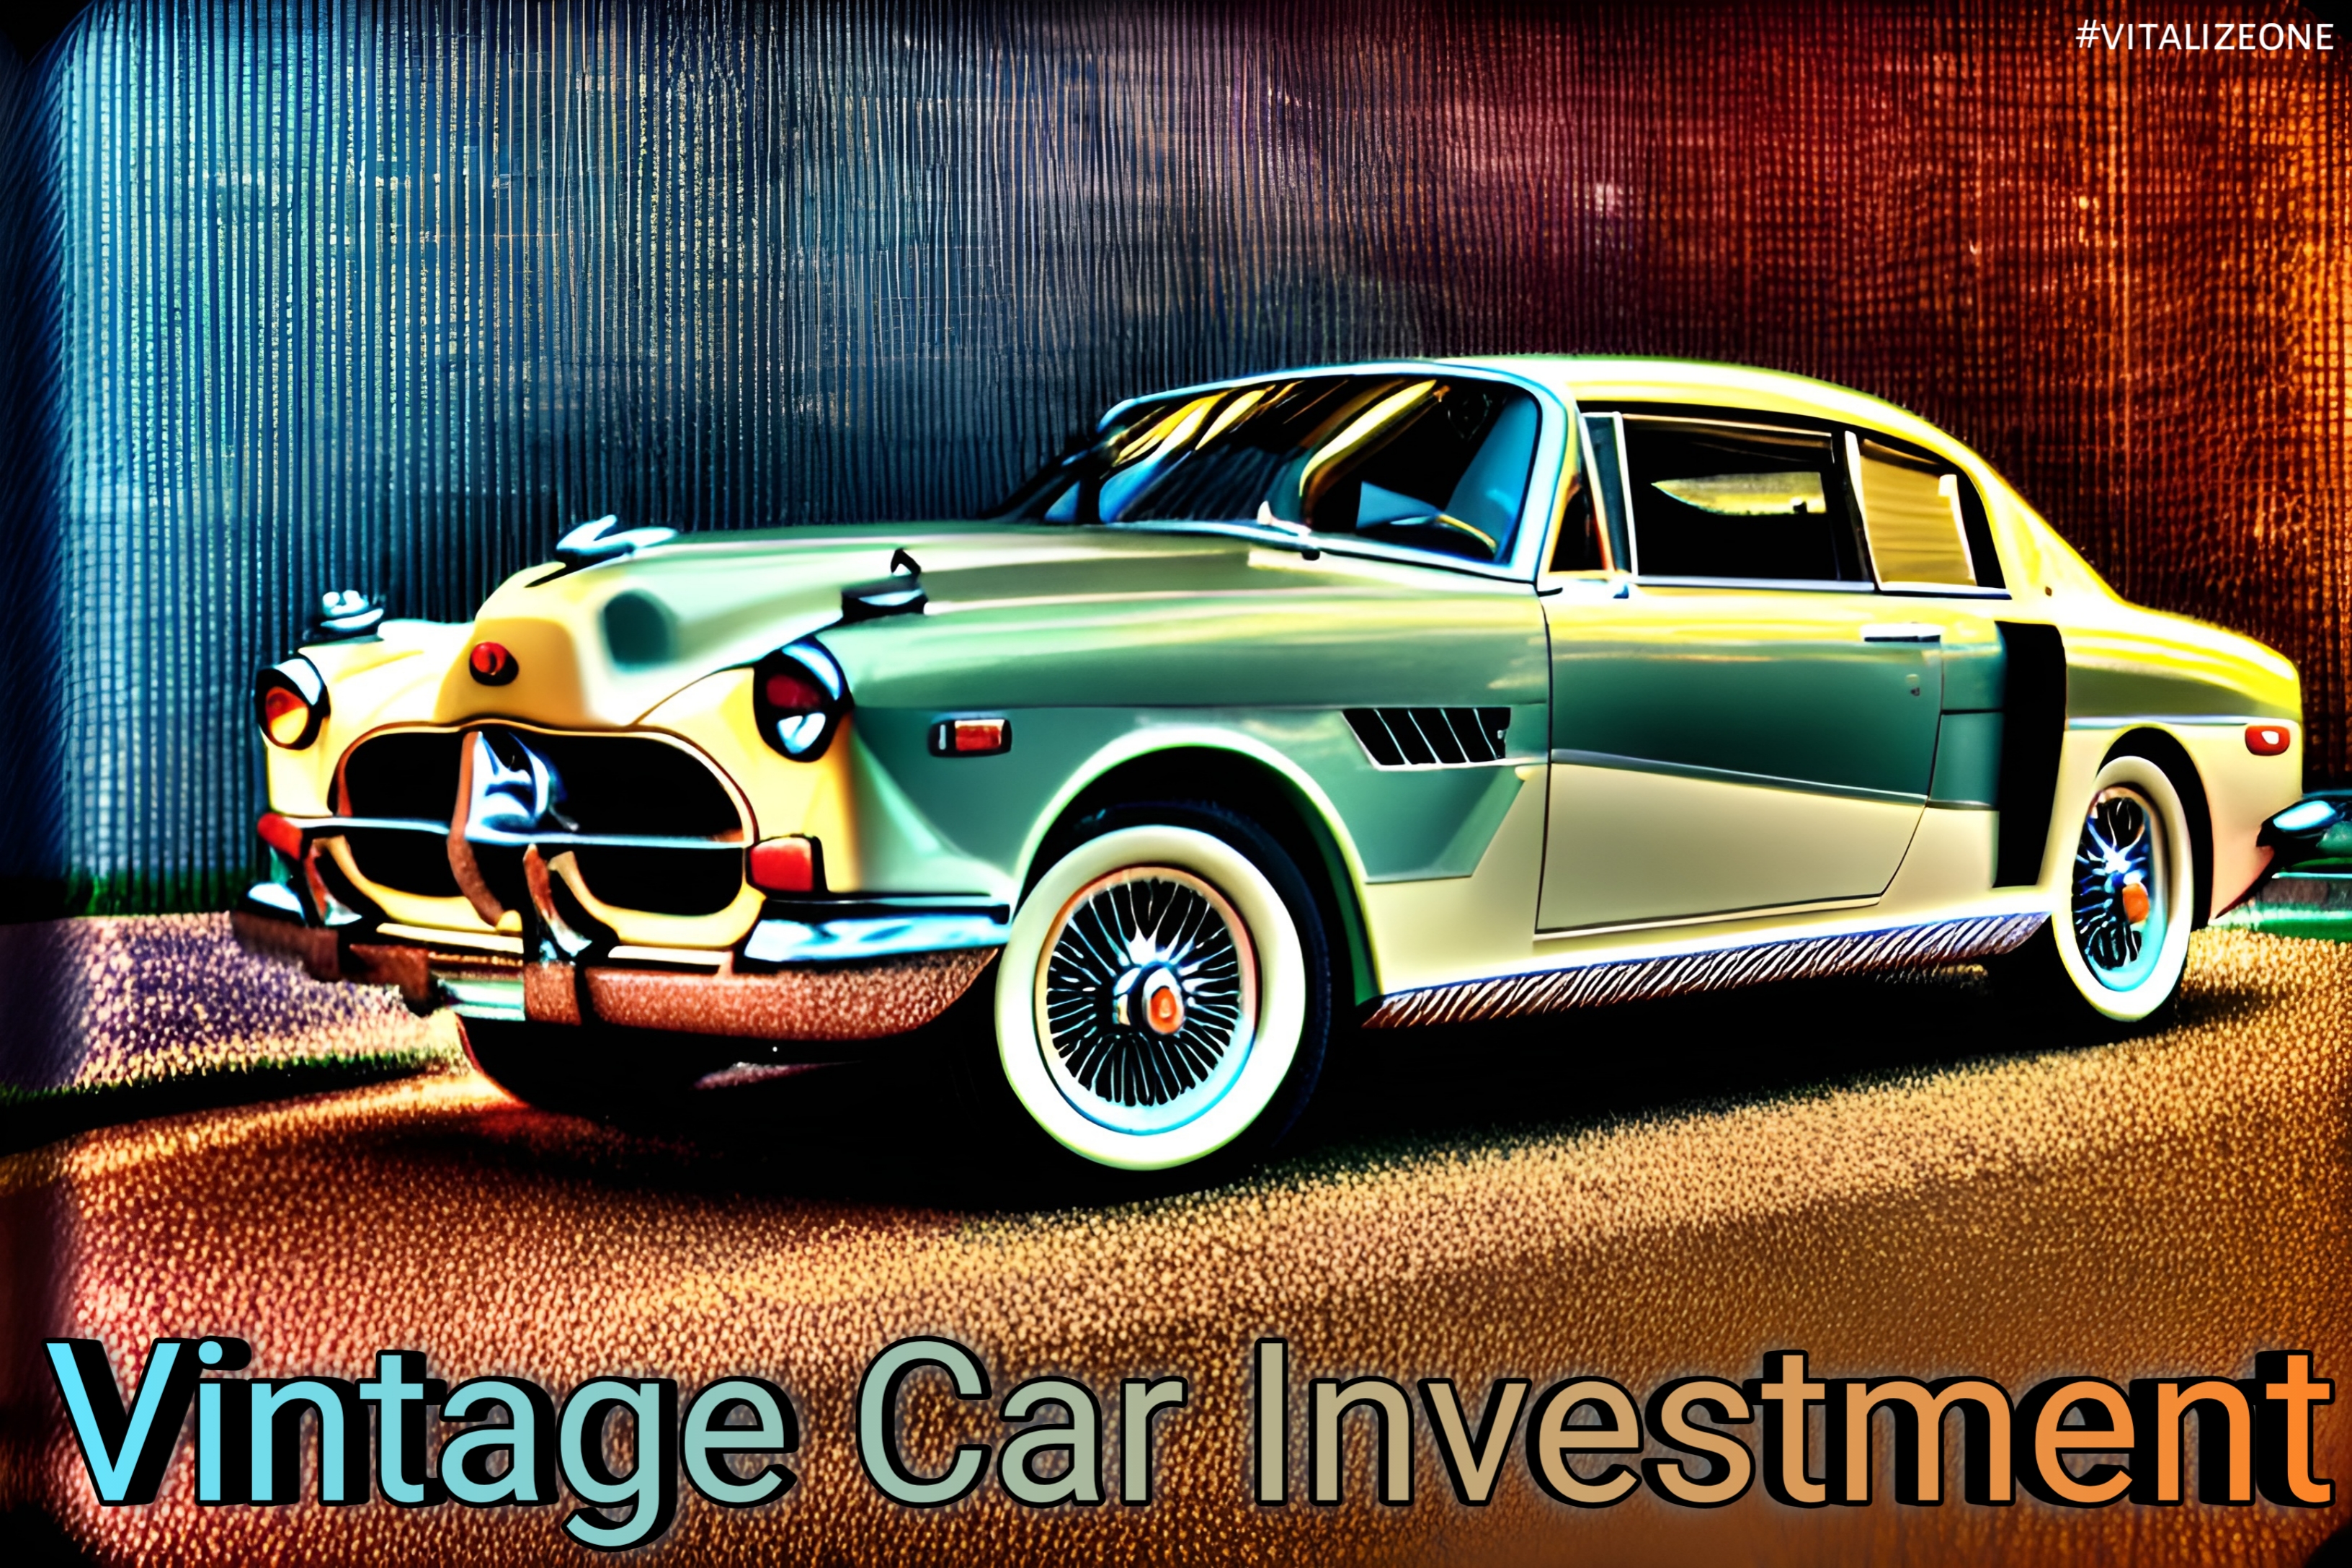 Why Buying a Vintage Car Is a Great Investment in Retirement | VitalyTennant.com | #vitalizeone 1